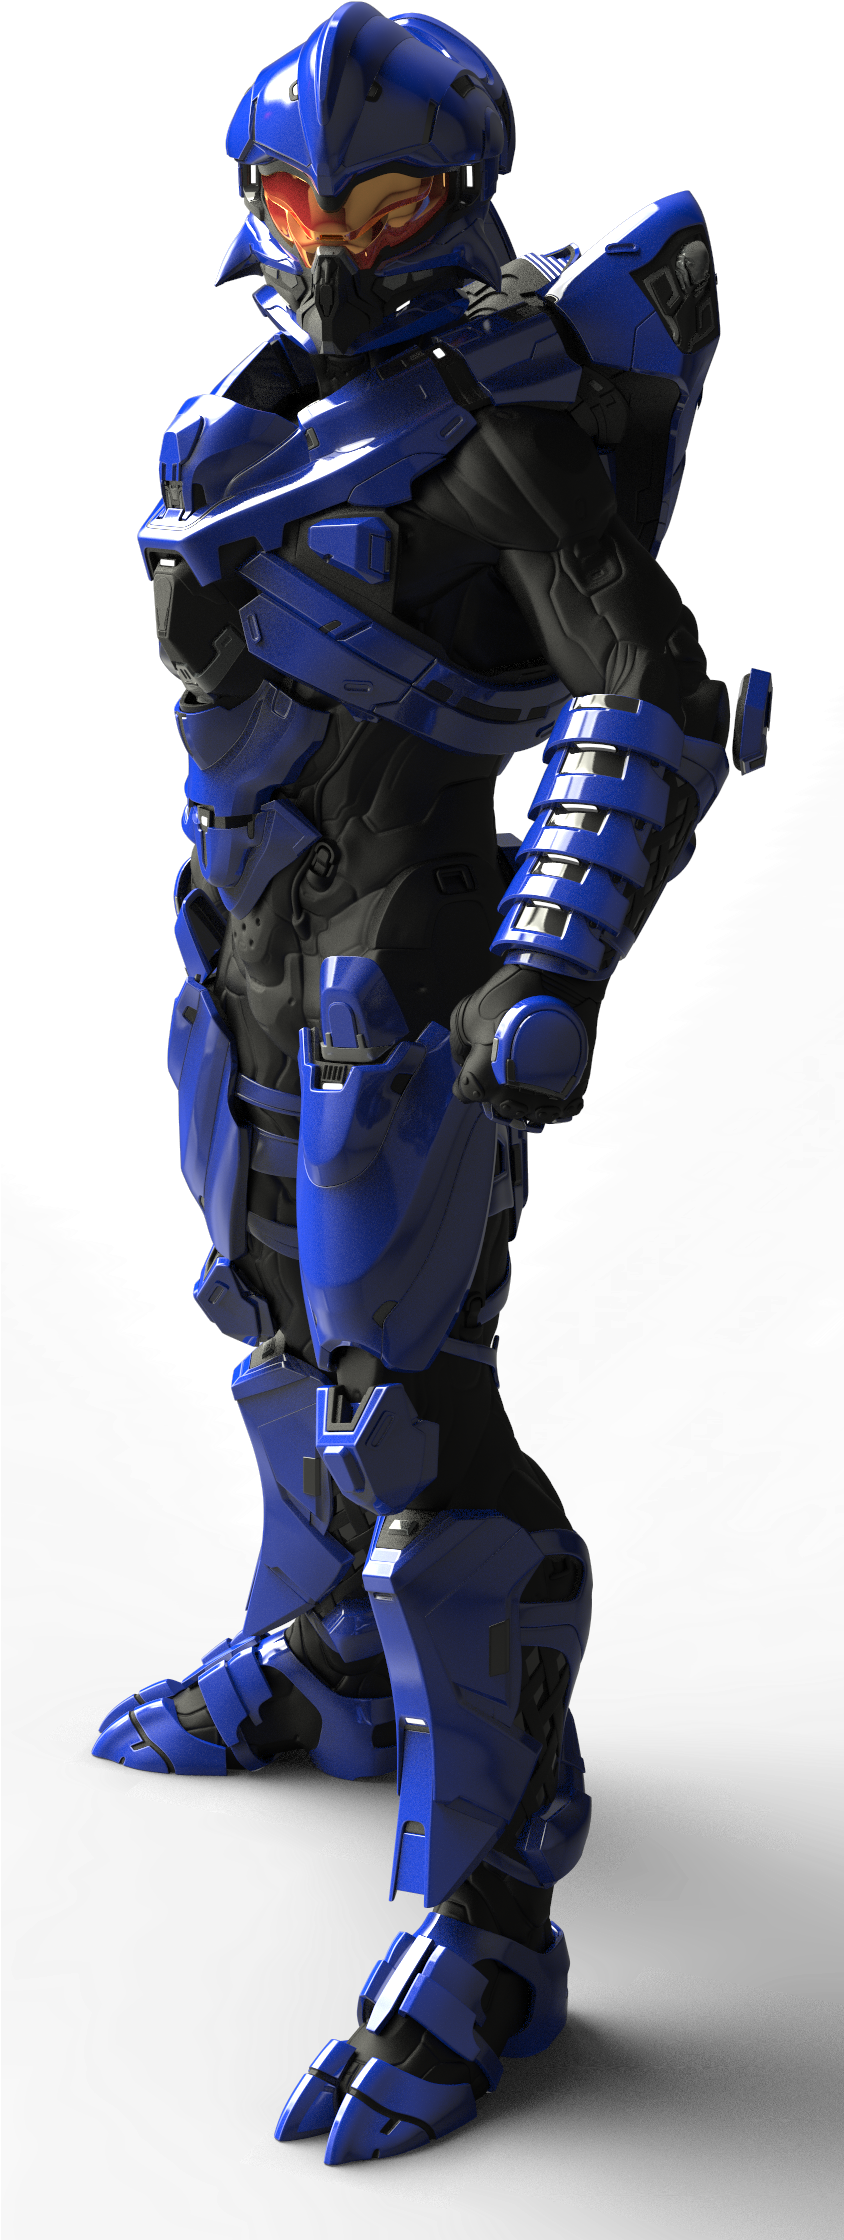 H5gmb Armor Helioskrill - Halo 5 Arbiter Spartan Armor (843x2304), Png Download